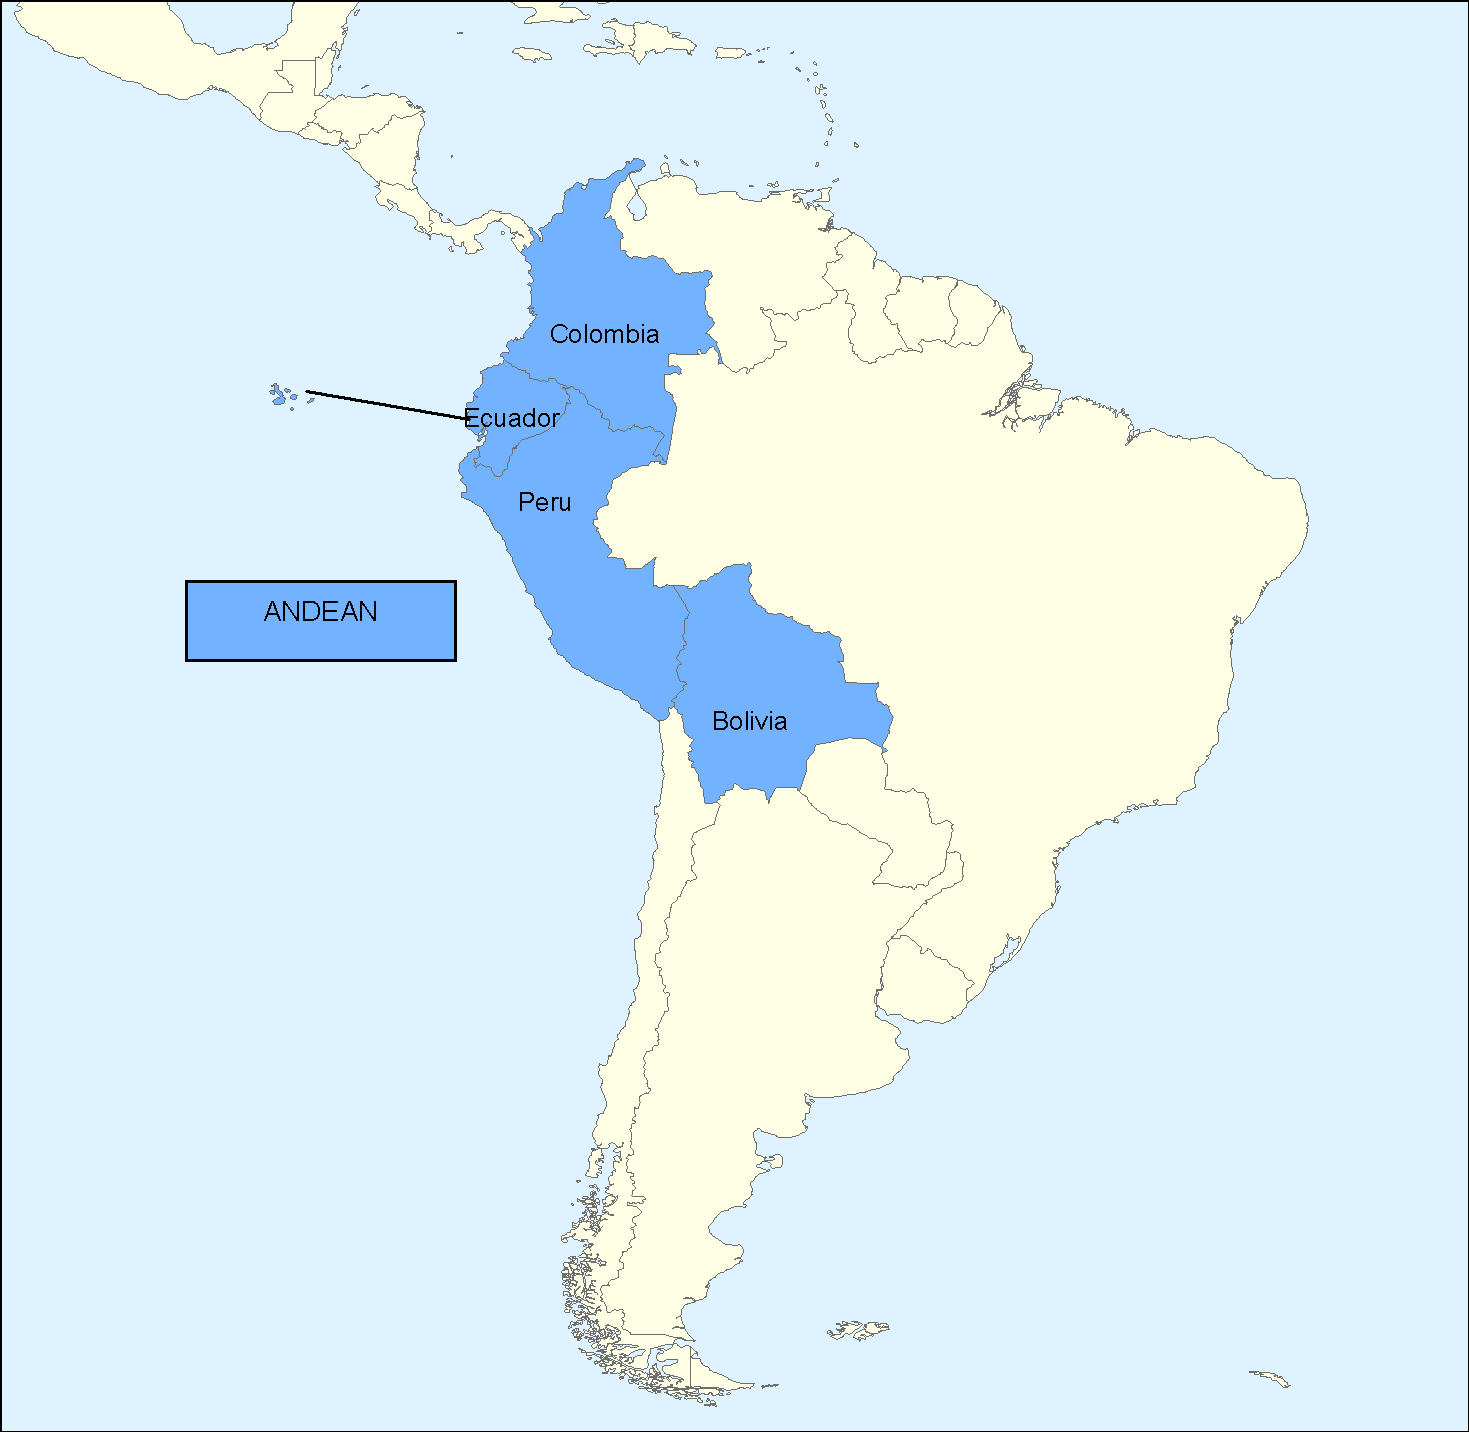 Peru and Colombia promote Chile and Venezuela's re-entry into the Andean Community. (Photo internet reproduction)